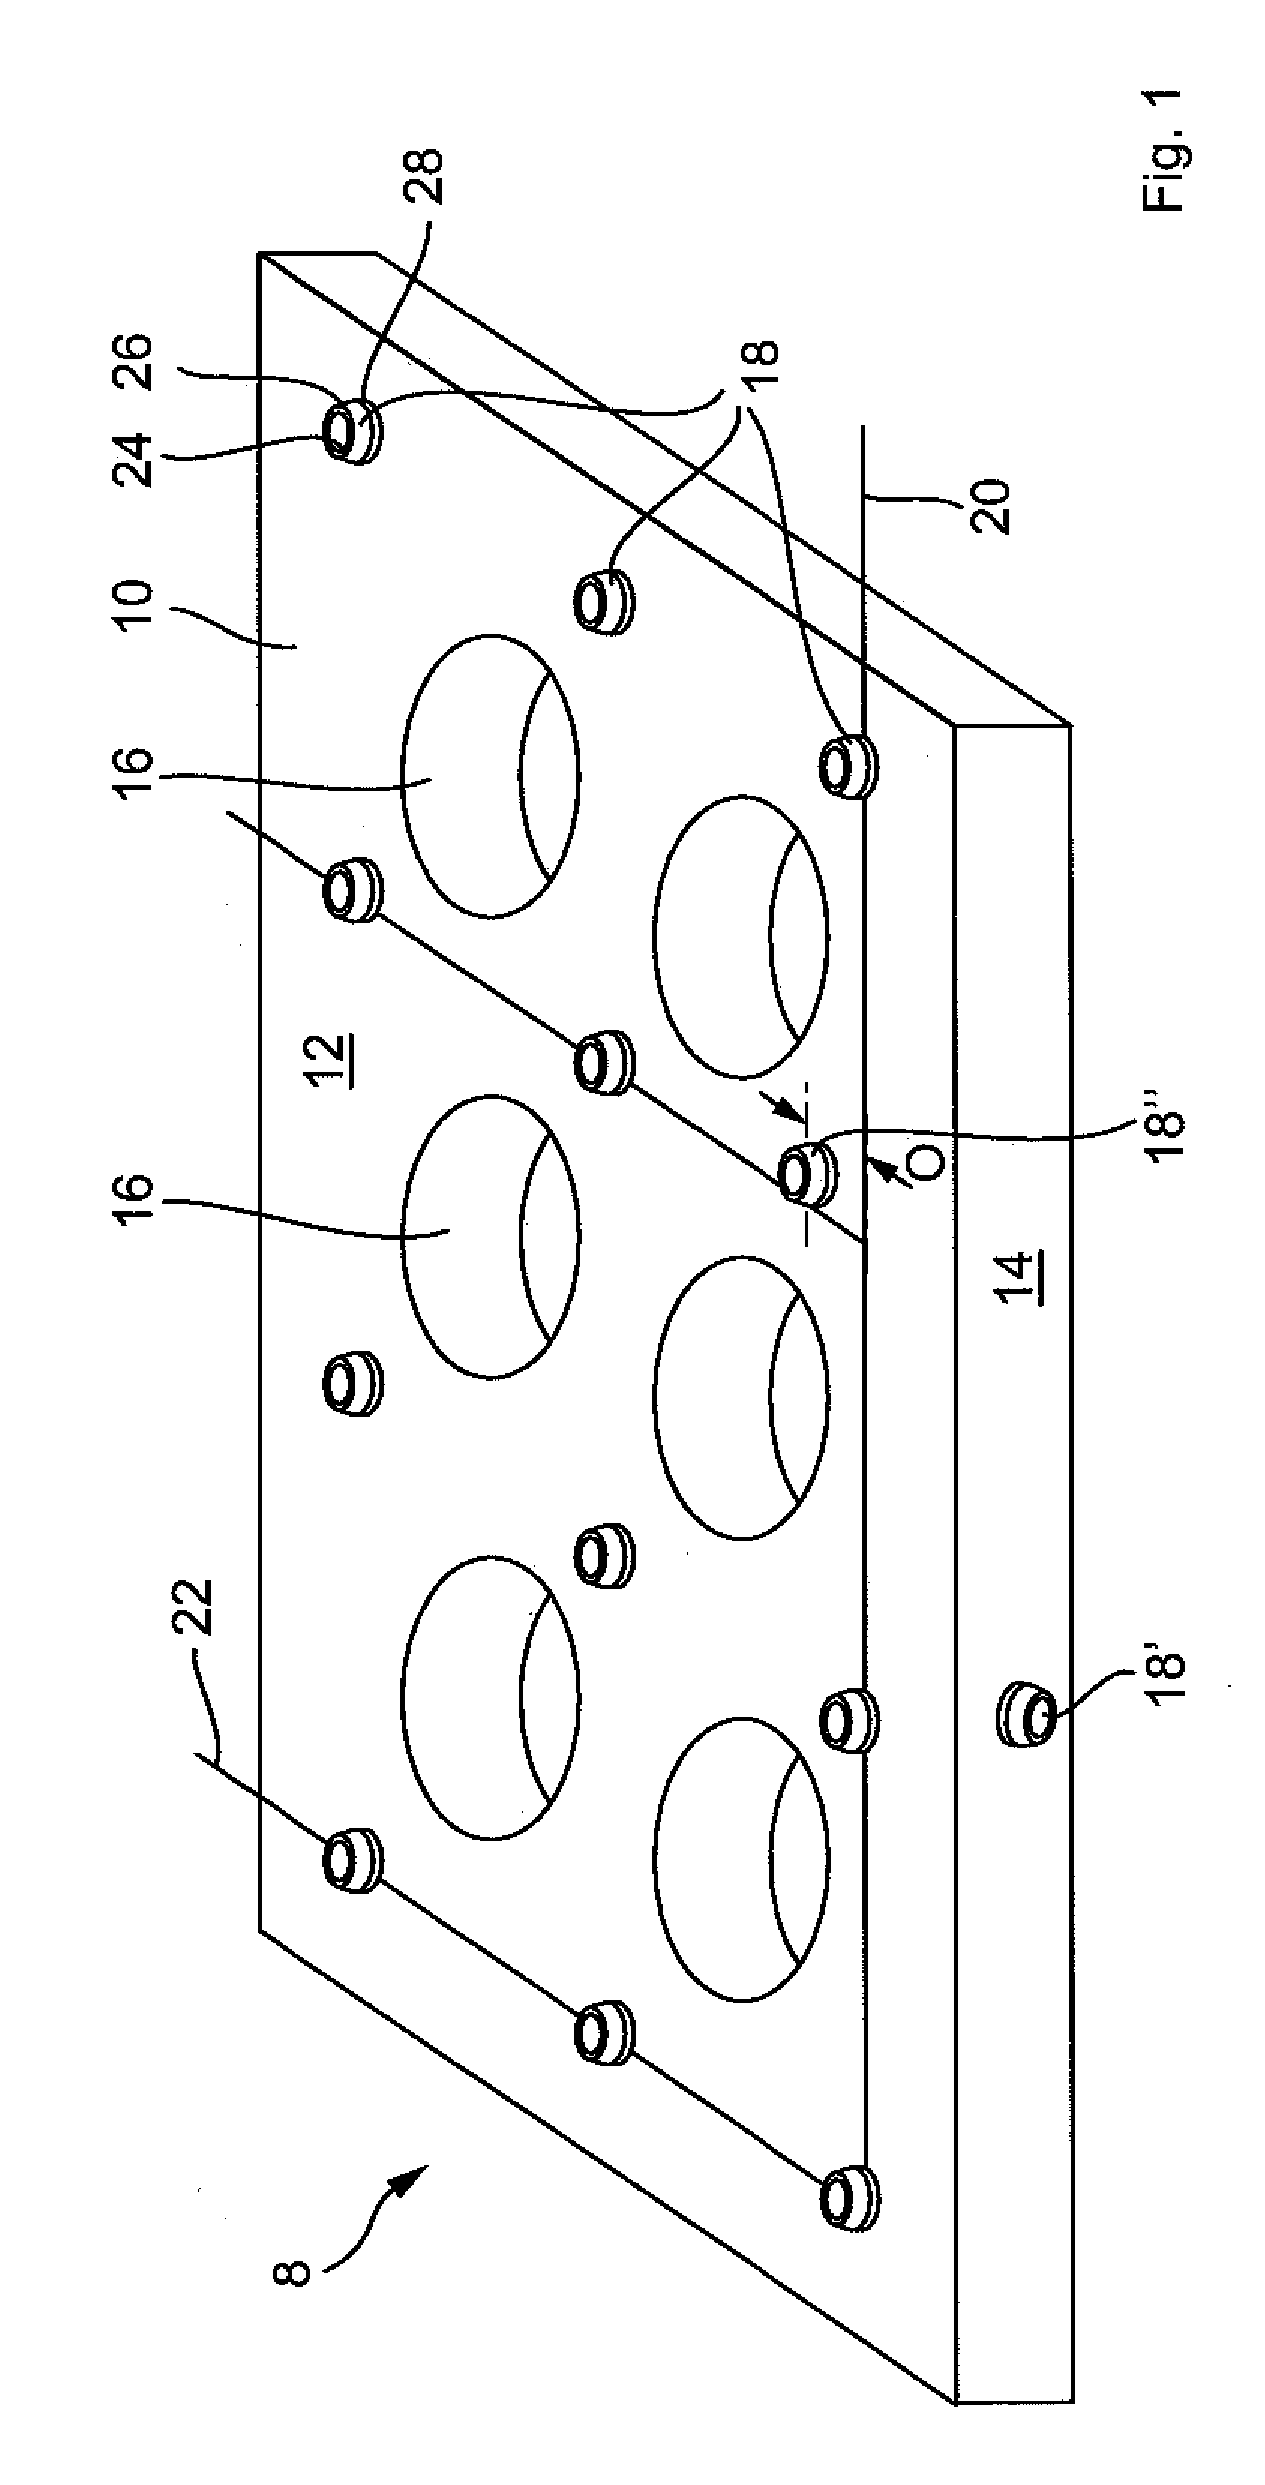 Apparatus for testing the accuracy of machine tools and measuring devices